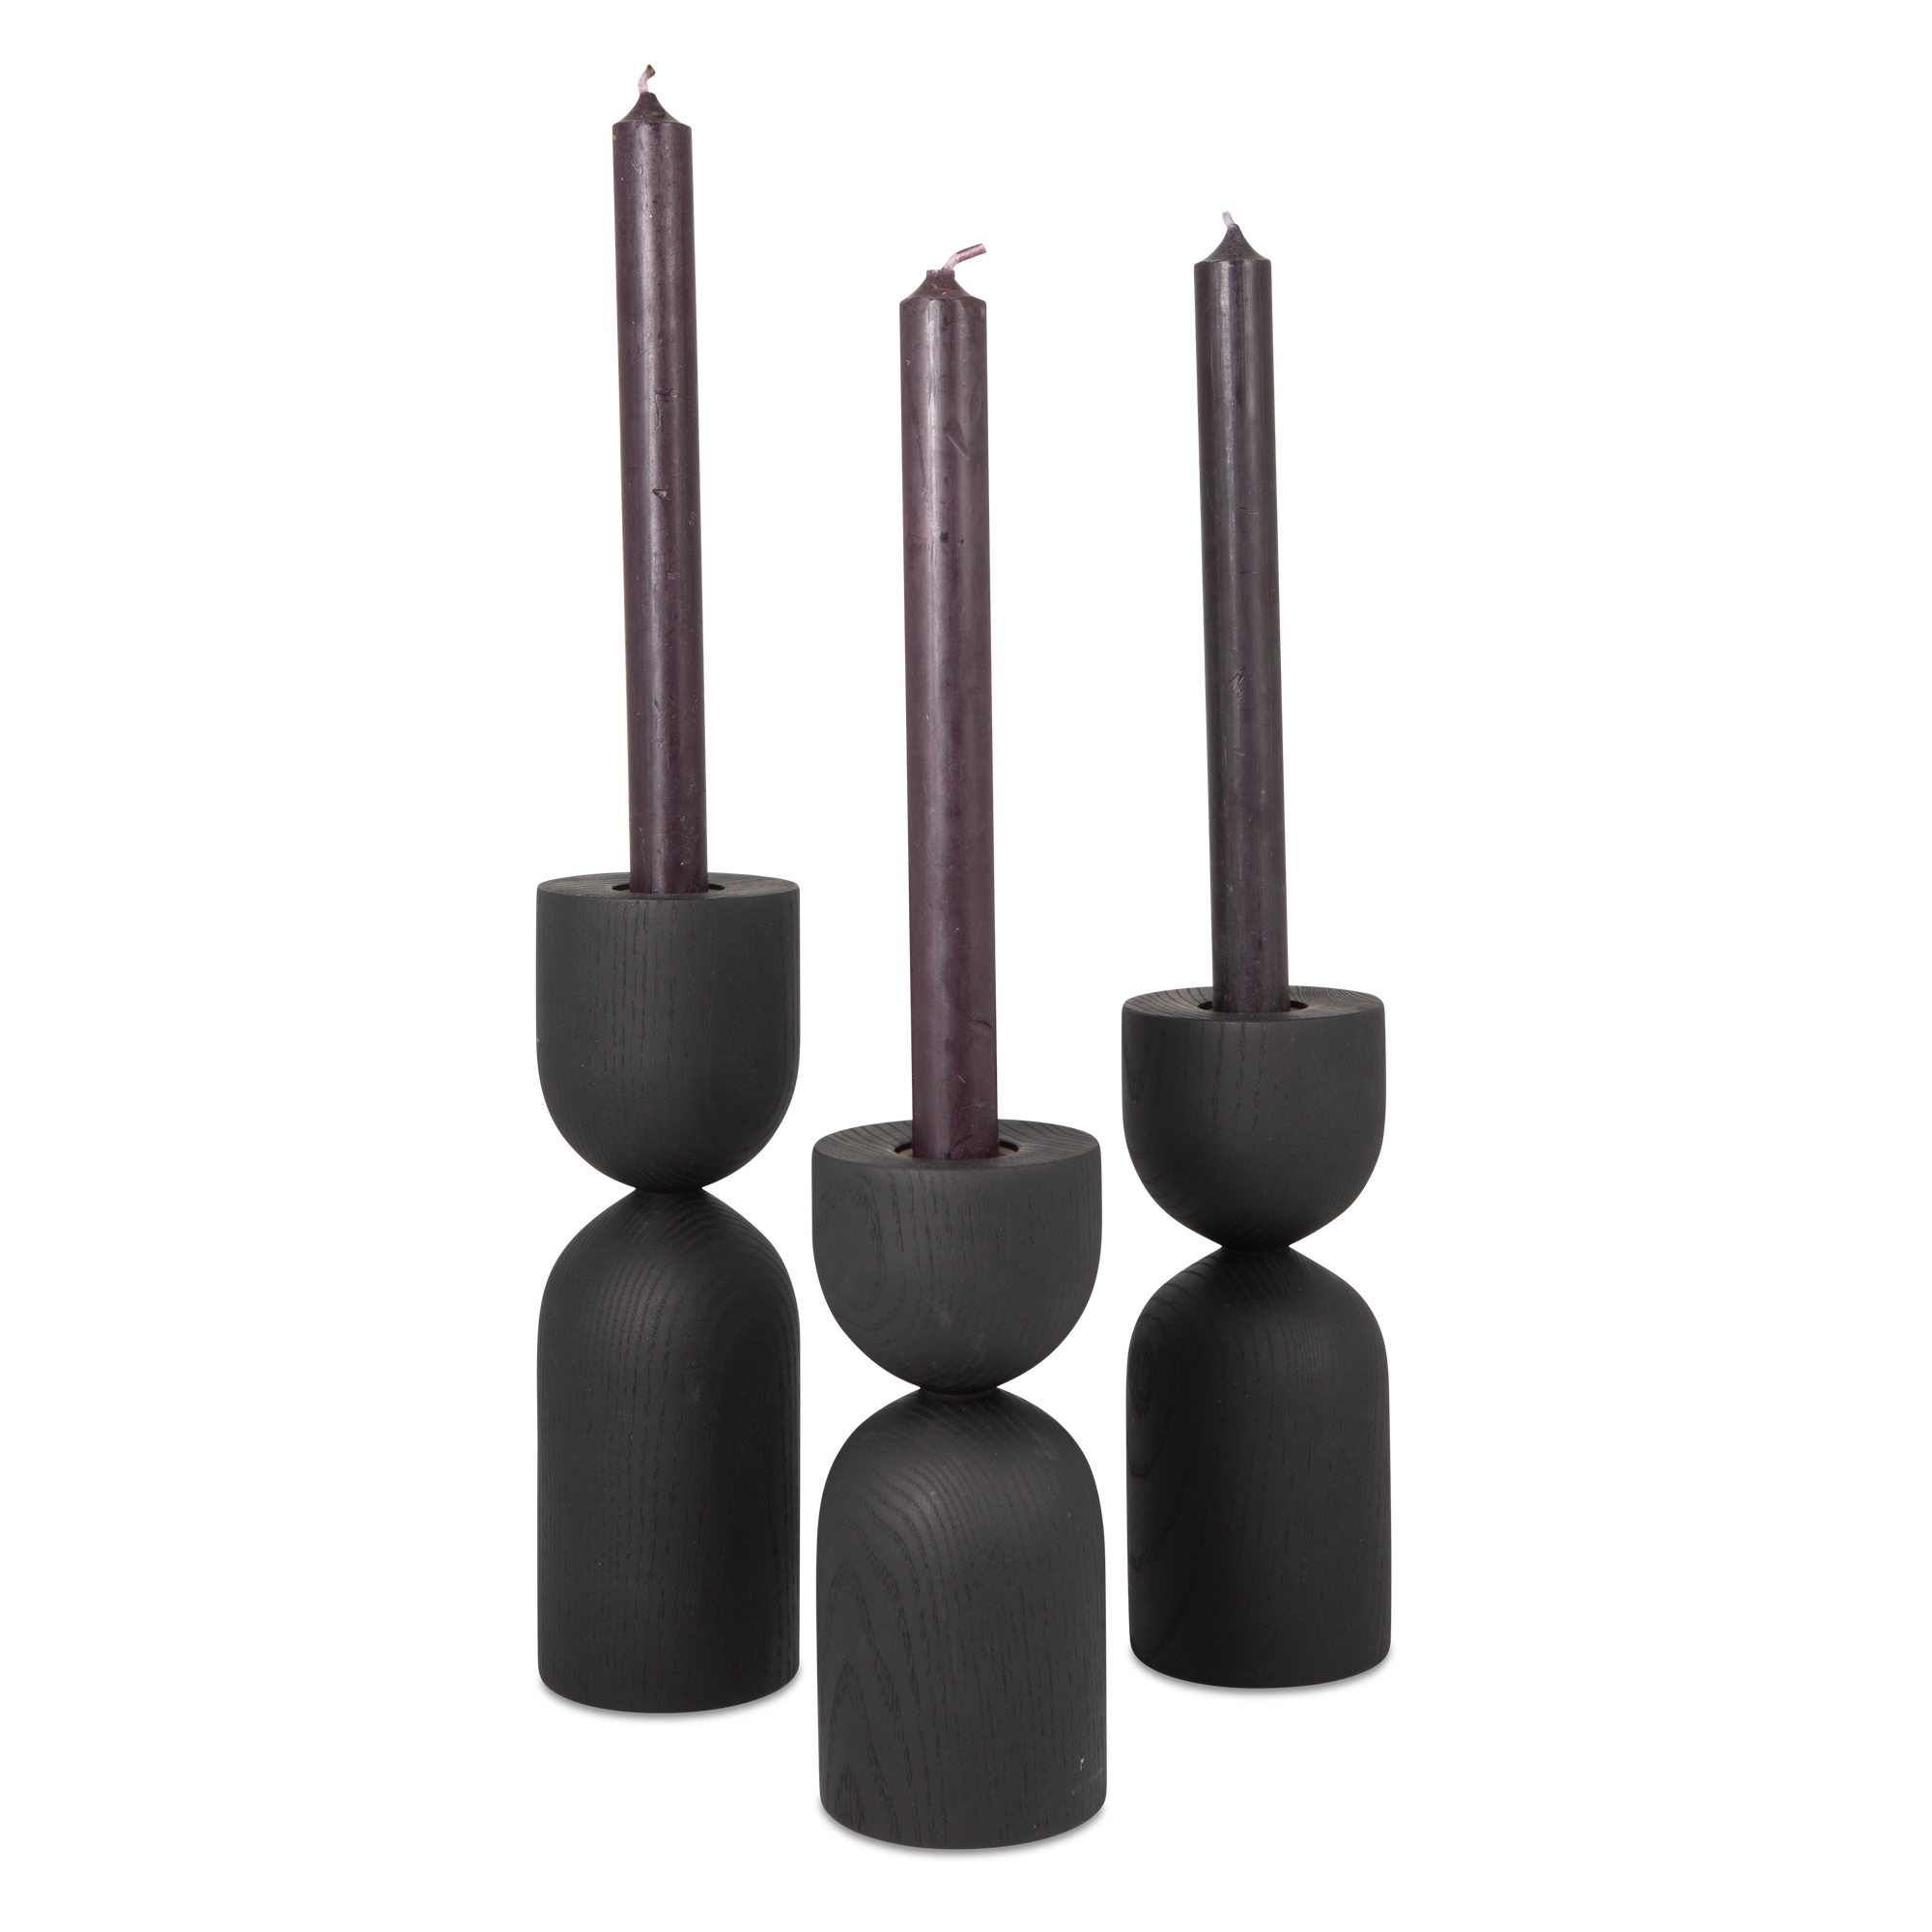 Turned from solid ebonized ash wood, the Hourglass Taper Candleholder feature distinct and eye-catching forms.